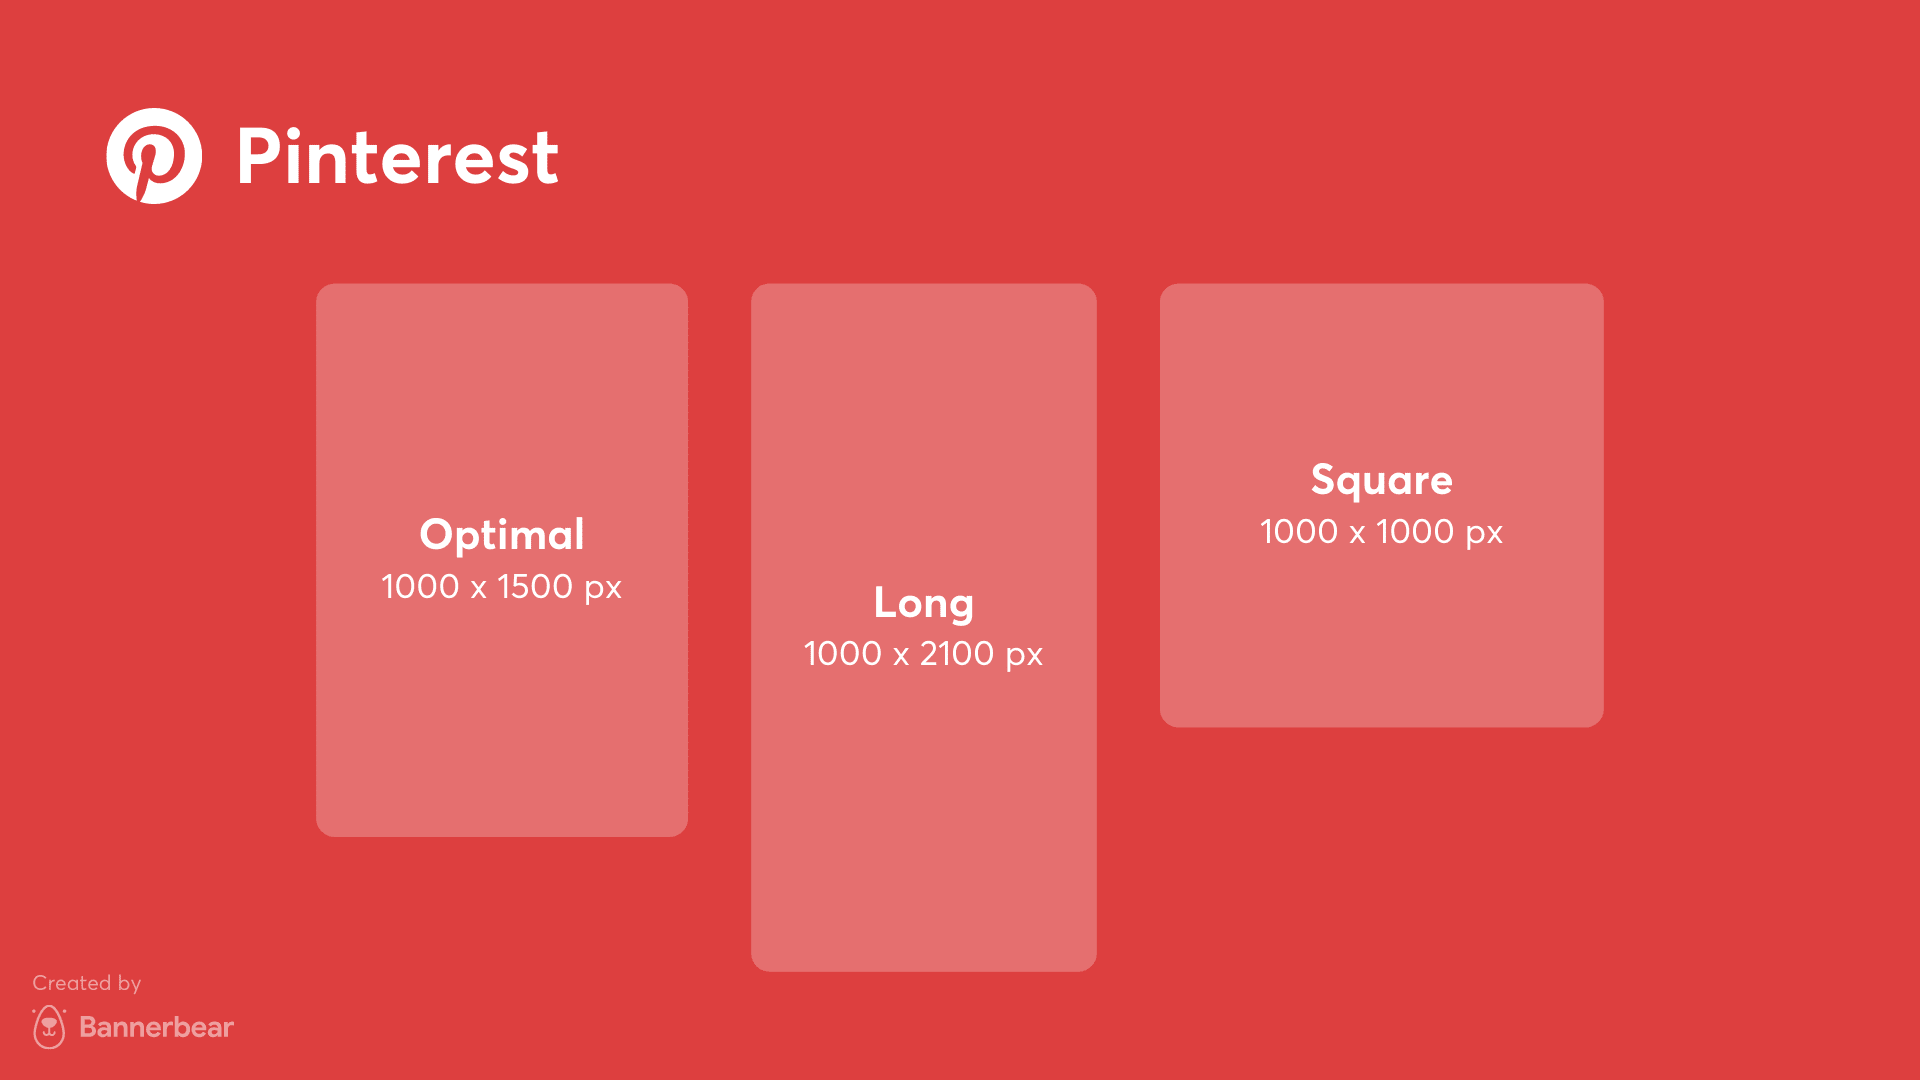 Pinterest dimensions and sizes 